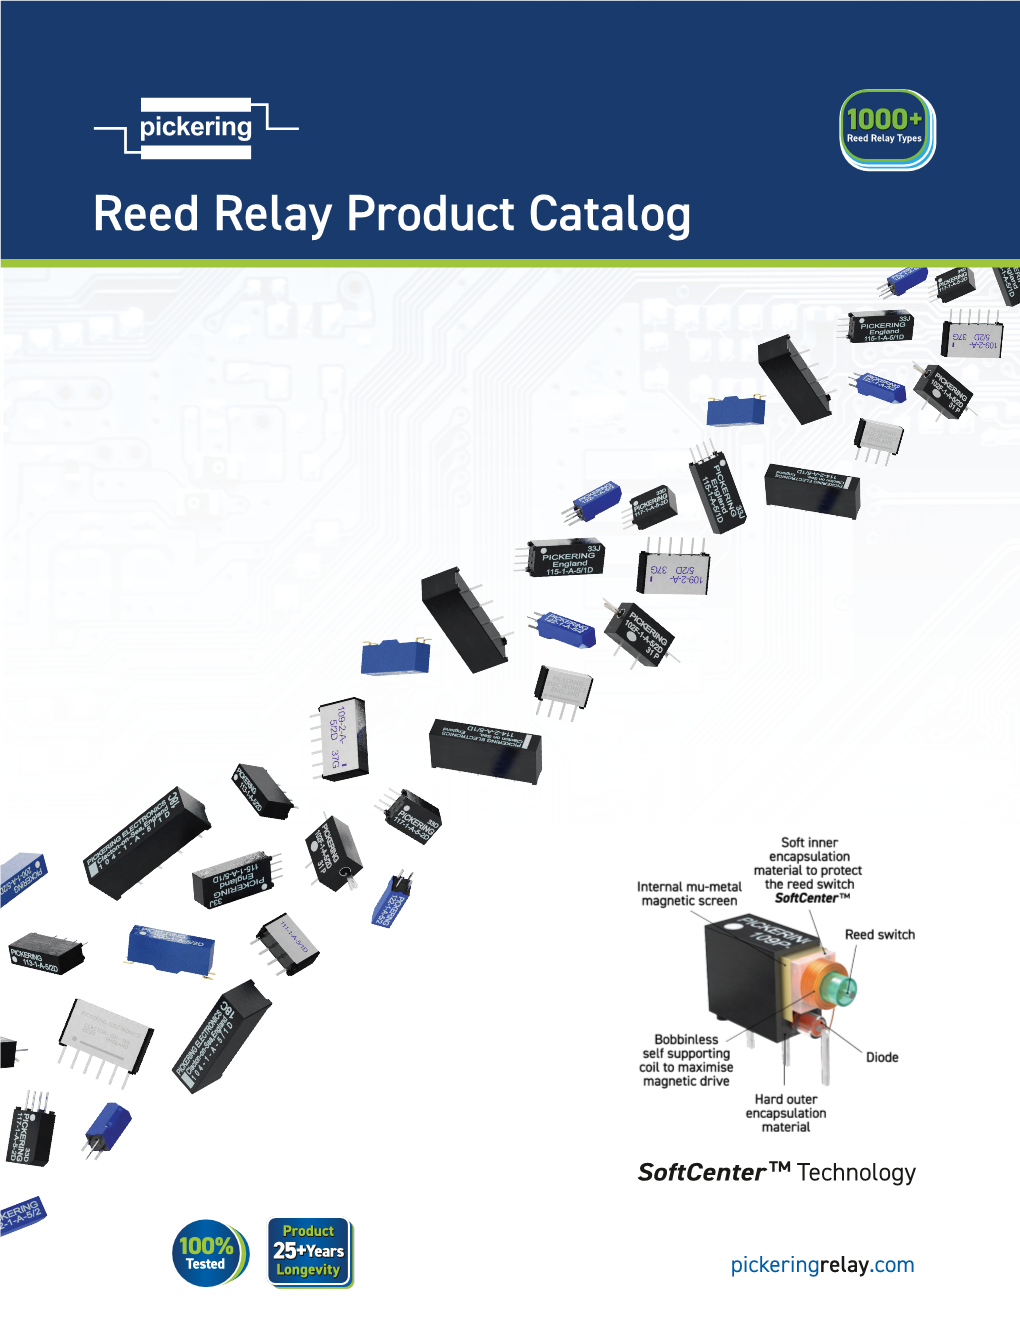 Reed Relay Product Catalog Pickering | Reed Relay Product Catalog | Pickering Relay .Com